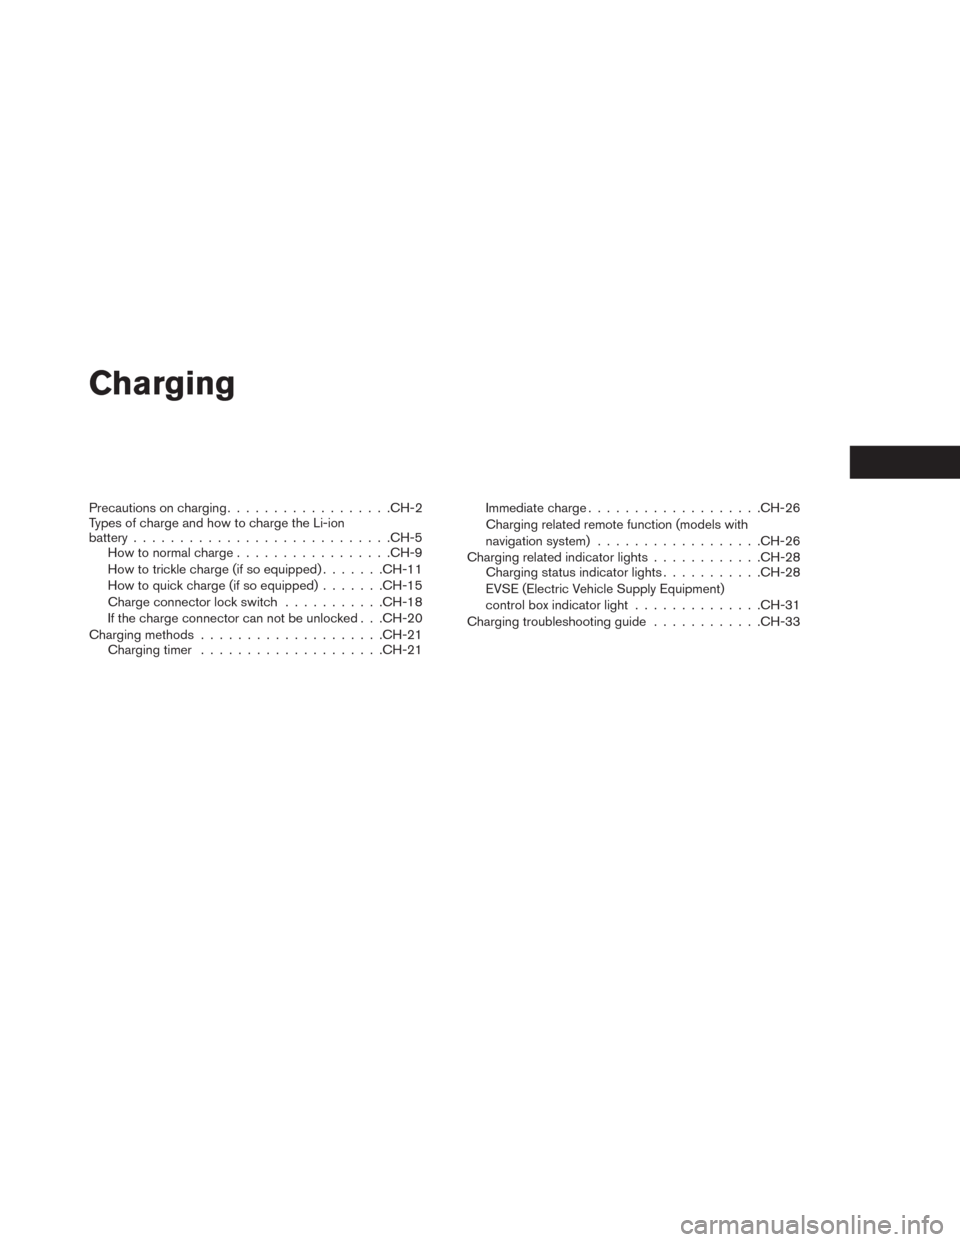 NISSAN LEAF 2014 1.G Owners Manual Charging
Precautions on charging..................CH-2
Types of charge and how to charge the Li-ion
battery............................CH-5
How to normal charge.................CH-9
How to trickle cha